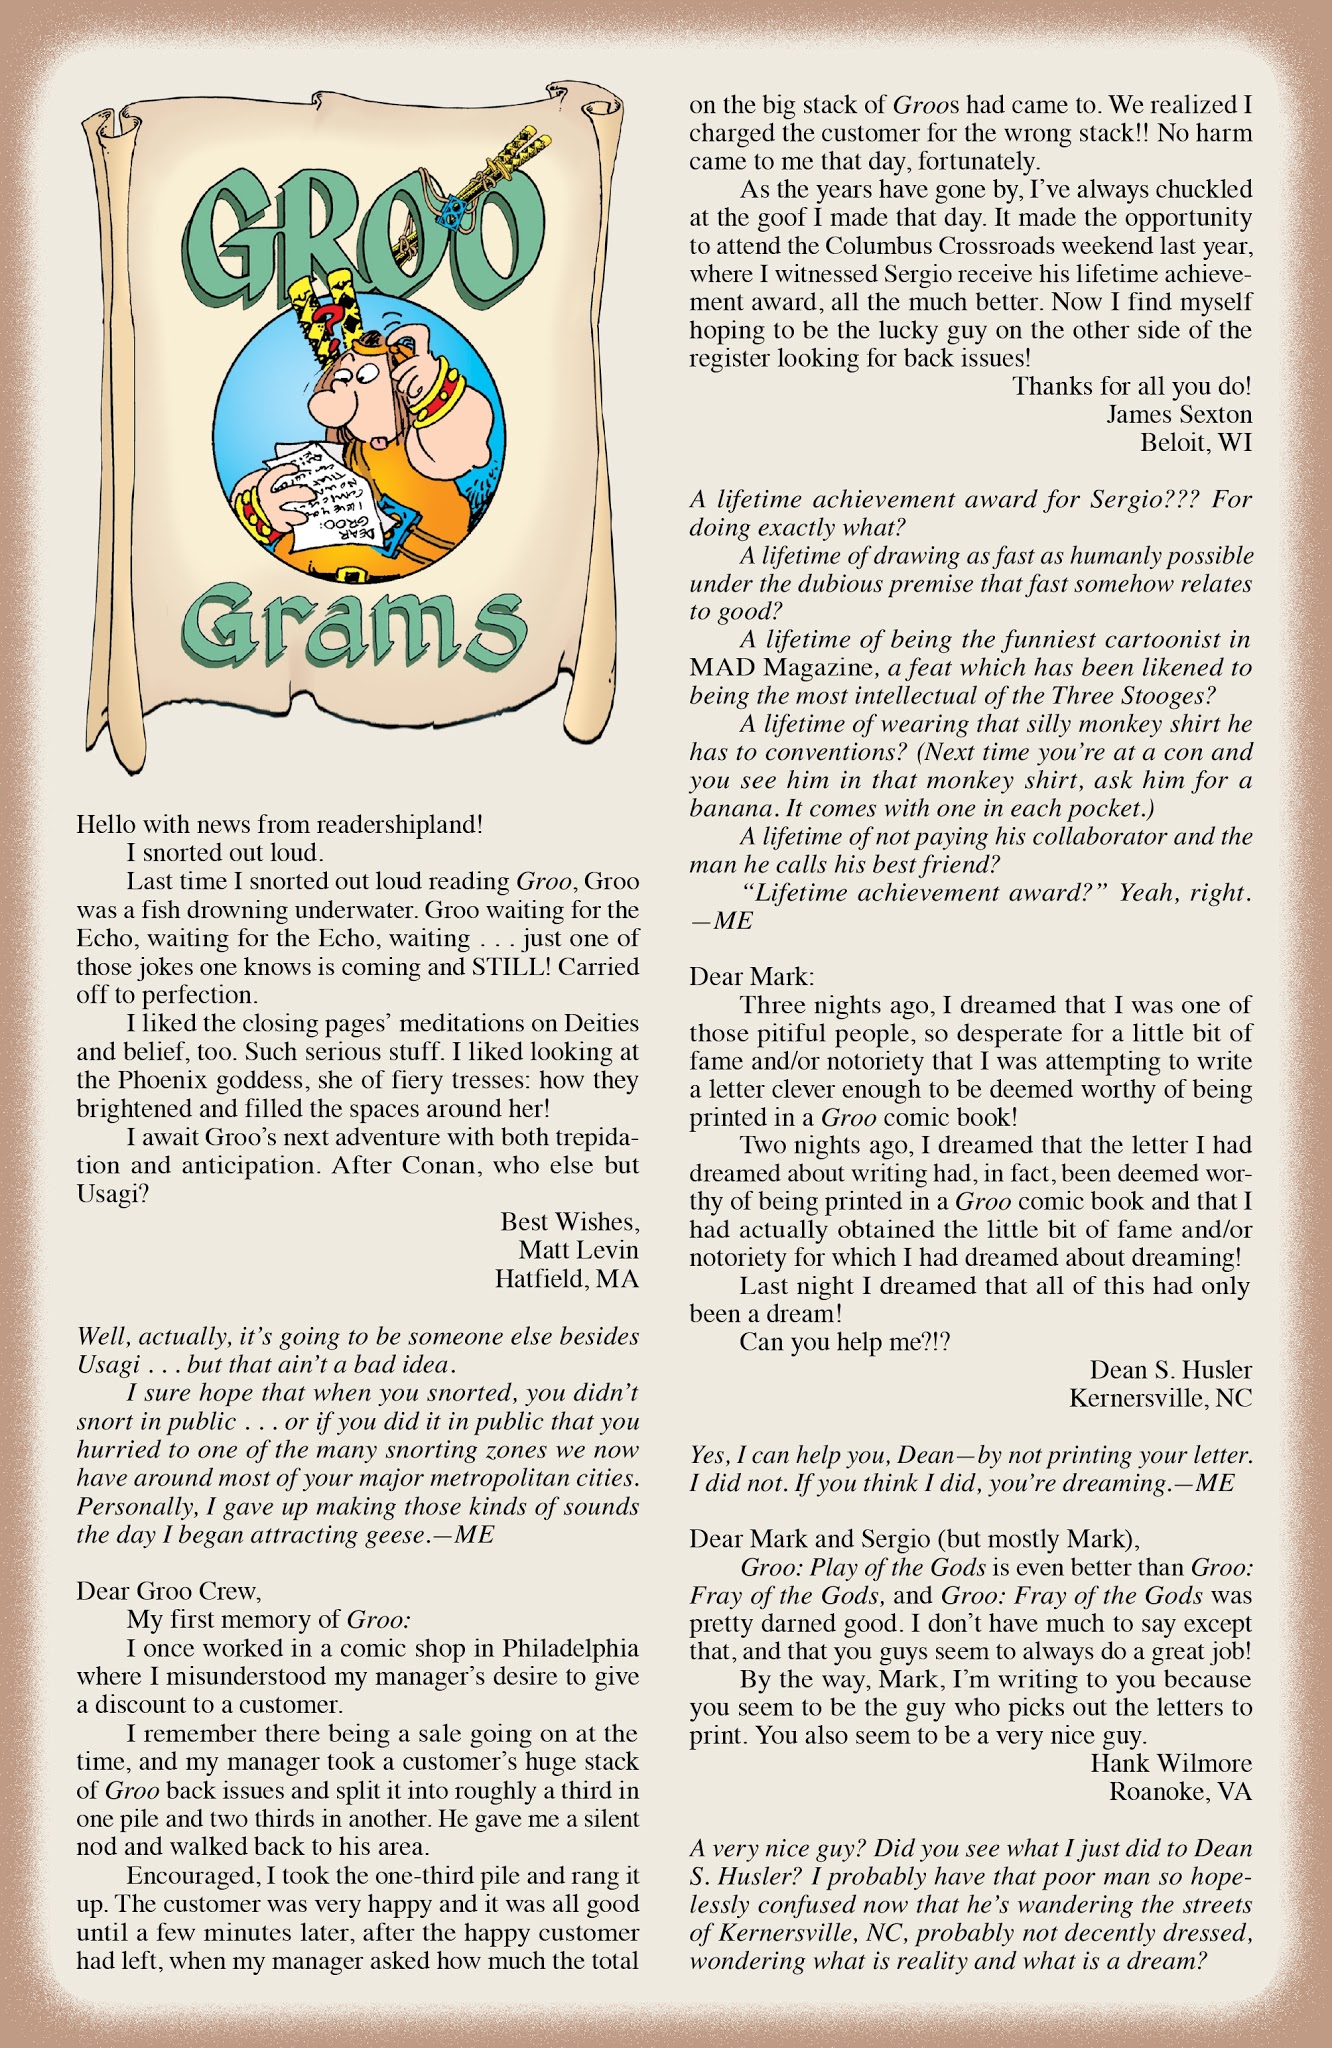 Read online Groo: Play of the Gods comic -  Issue #3 - 26